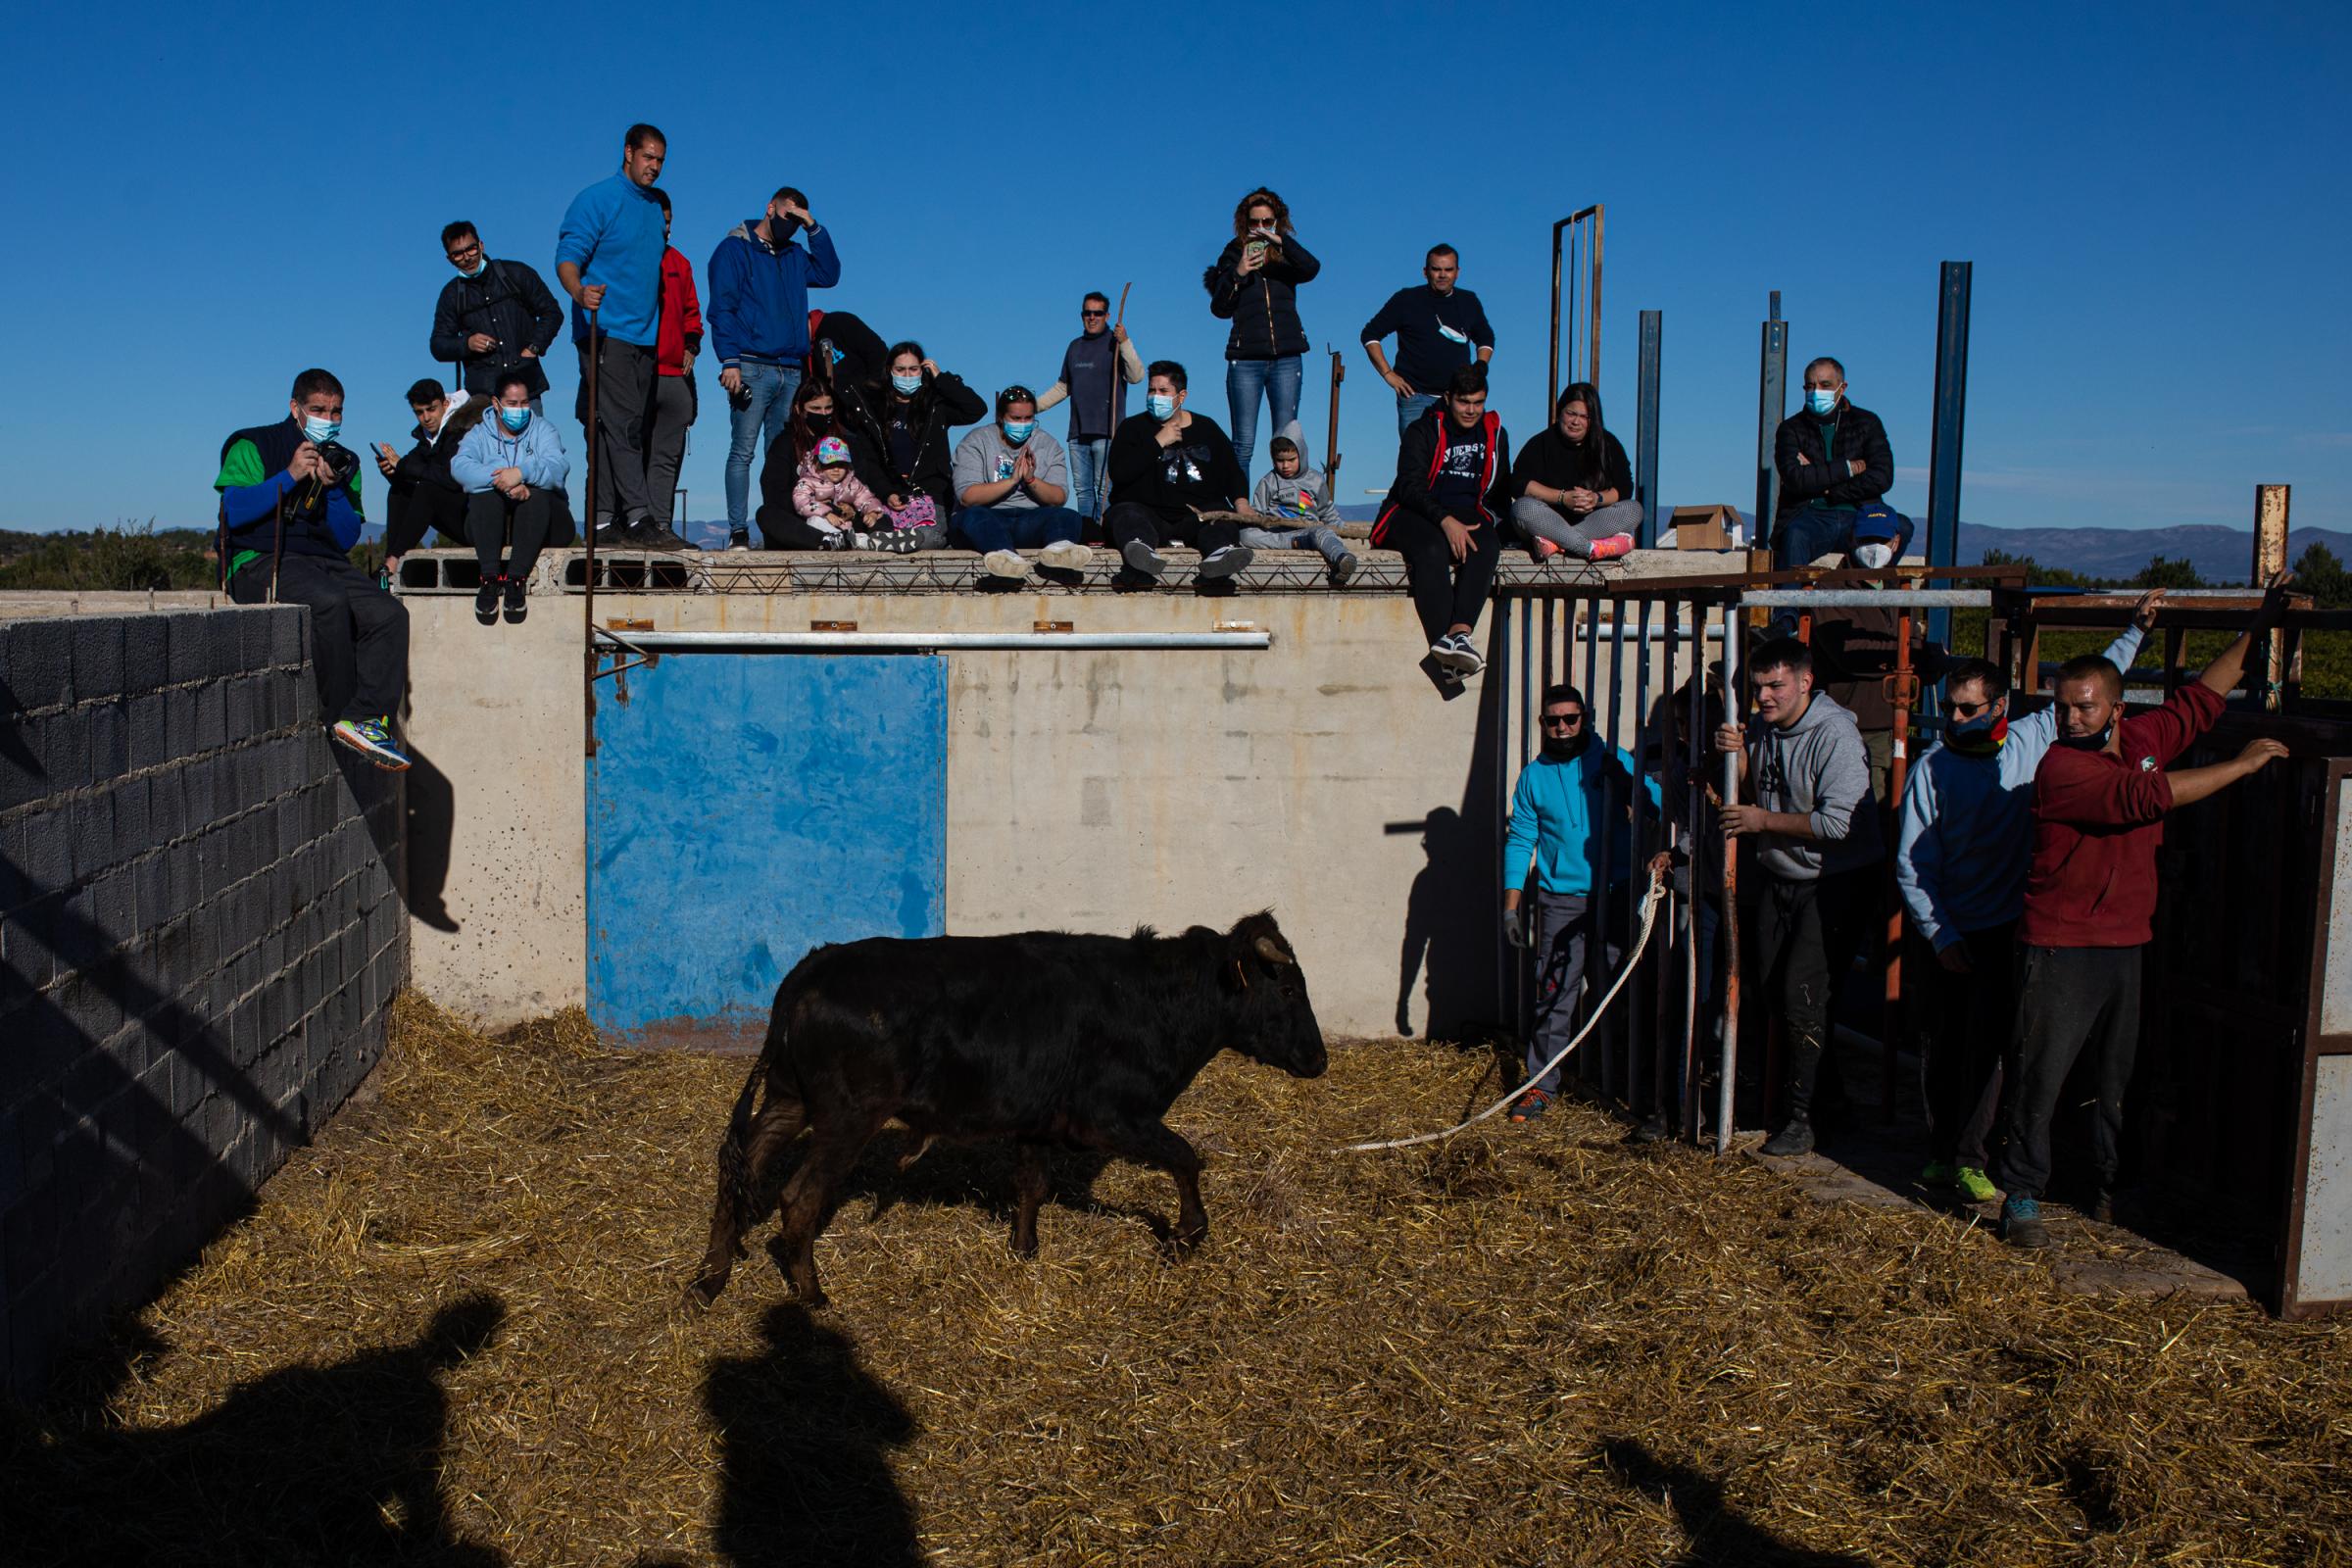 VALENCIA, SPAIN - DECEMBER 04: Family and friends of David, the owner of the stud farm, watch a calf just before capturing it among David&#39;s...